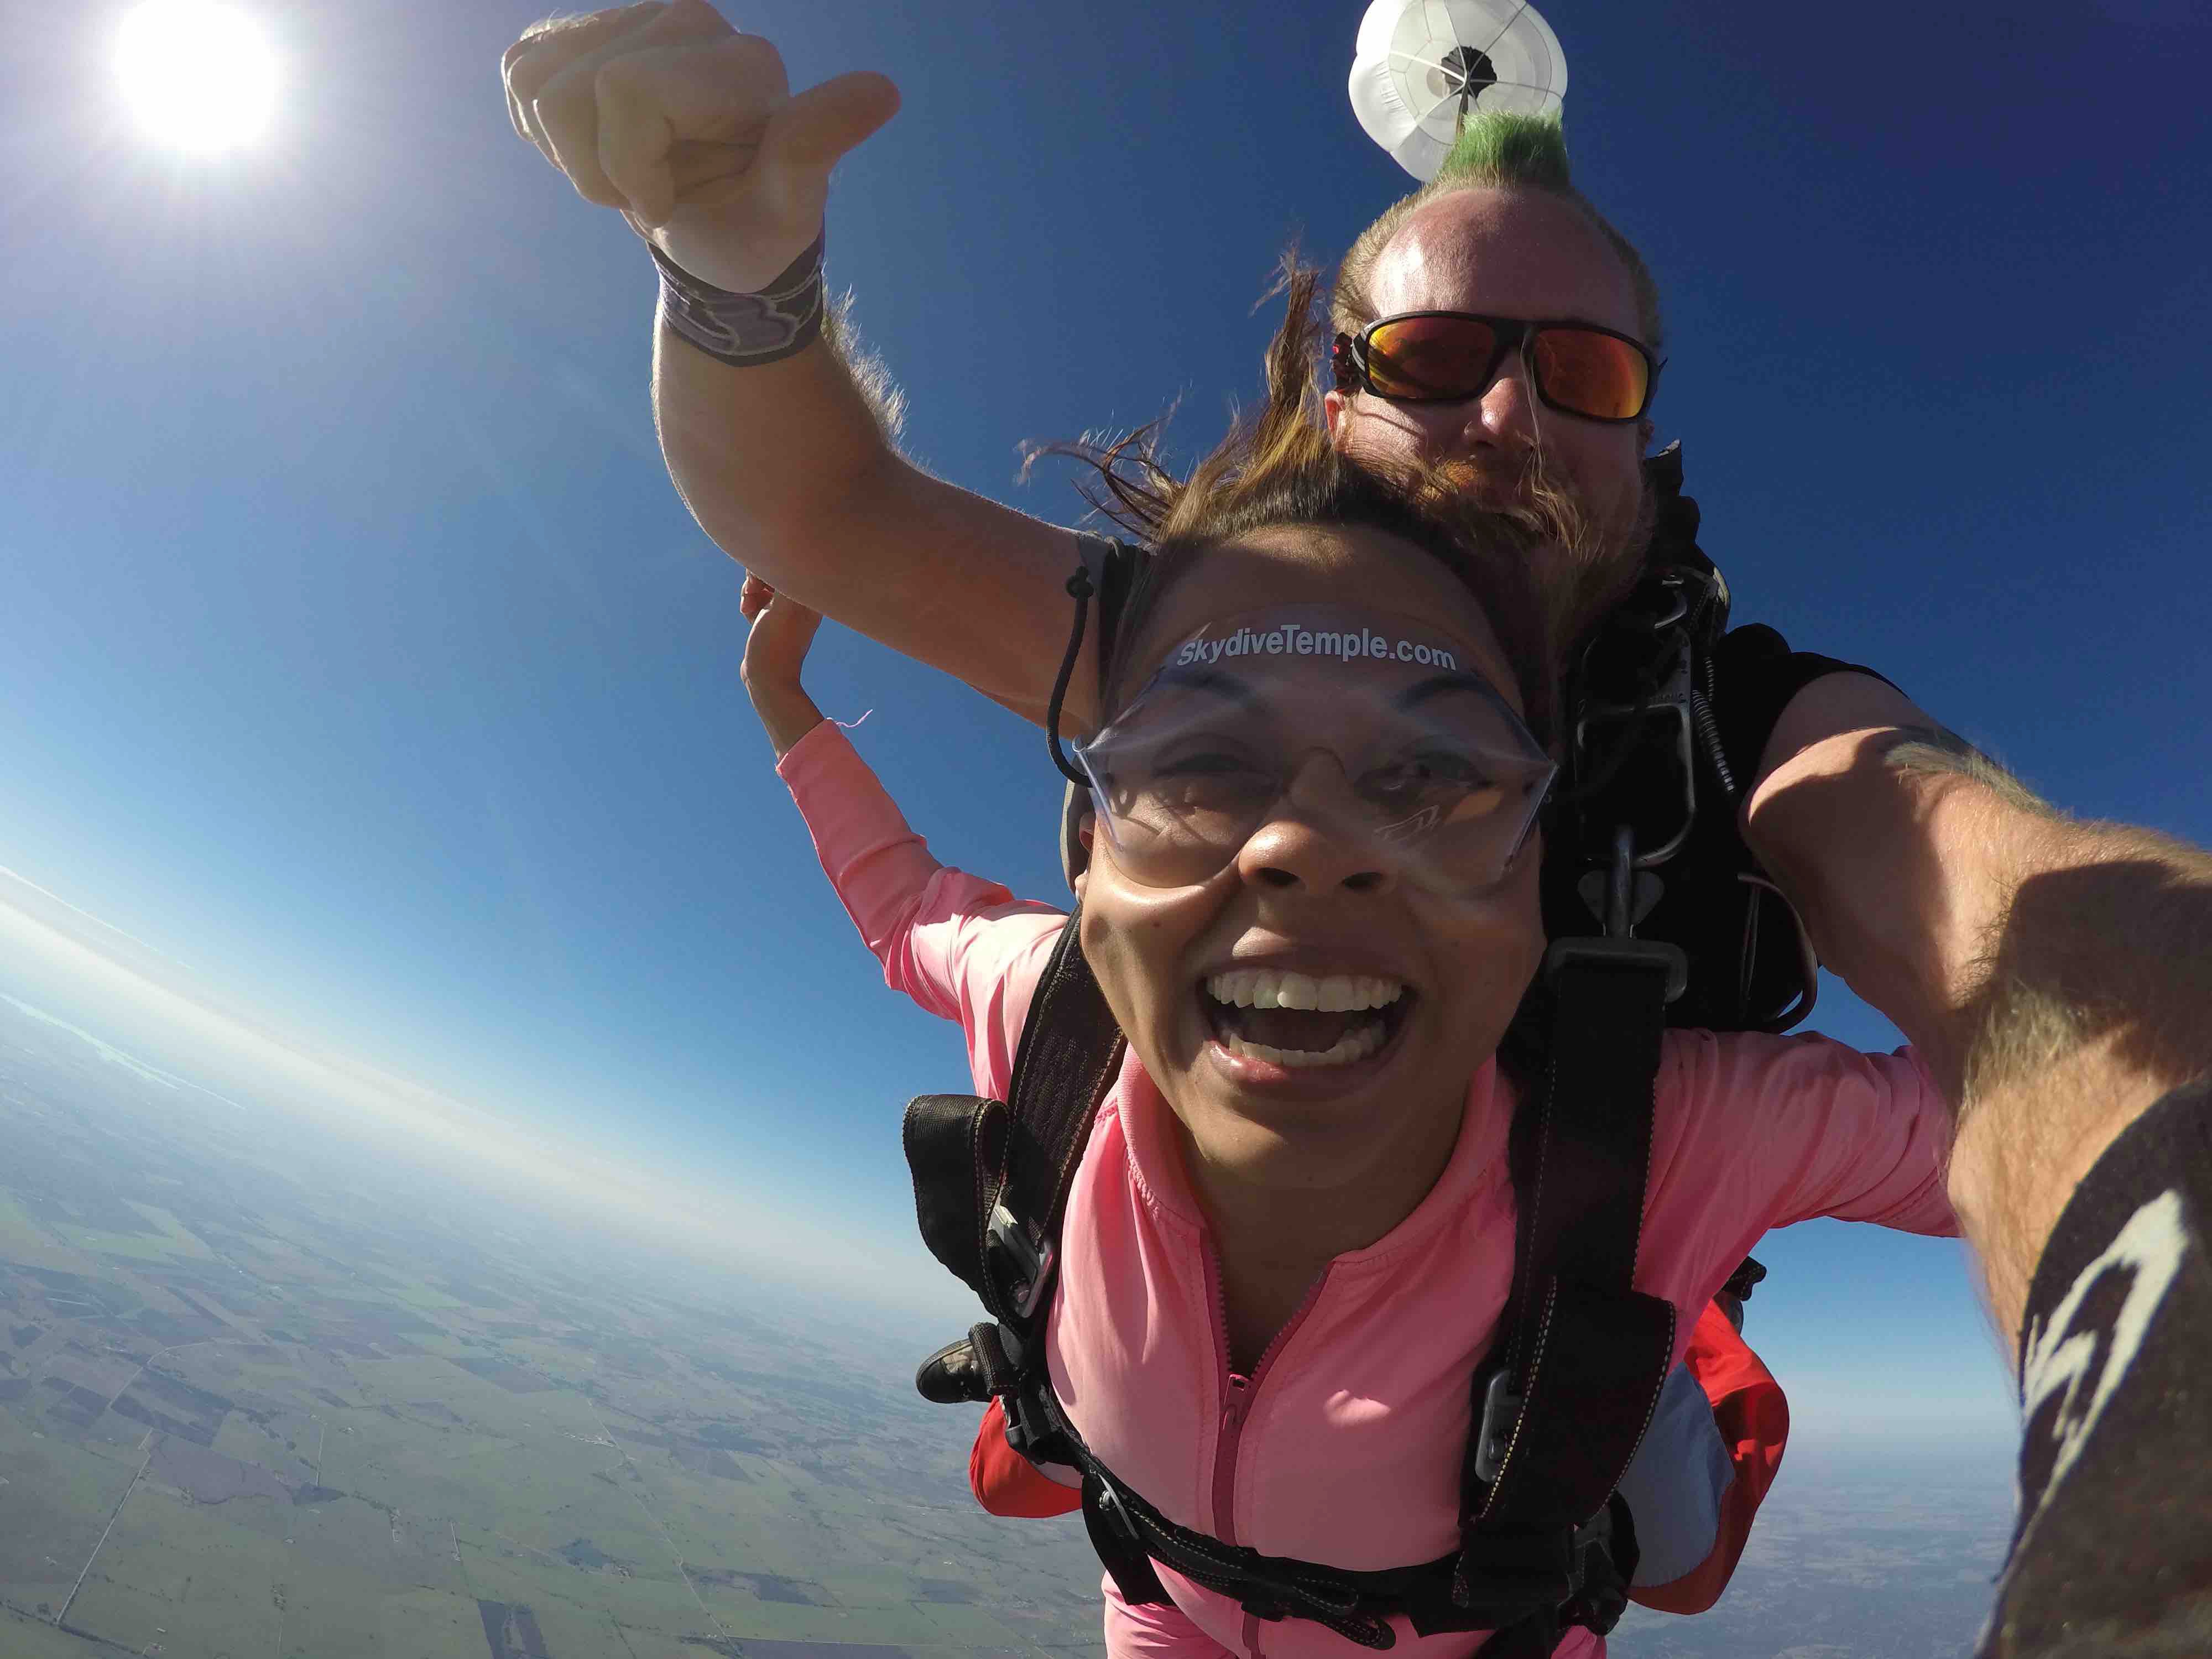 Skydive by Abilene today! The BEST skydiving experience in TEXAS!